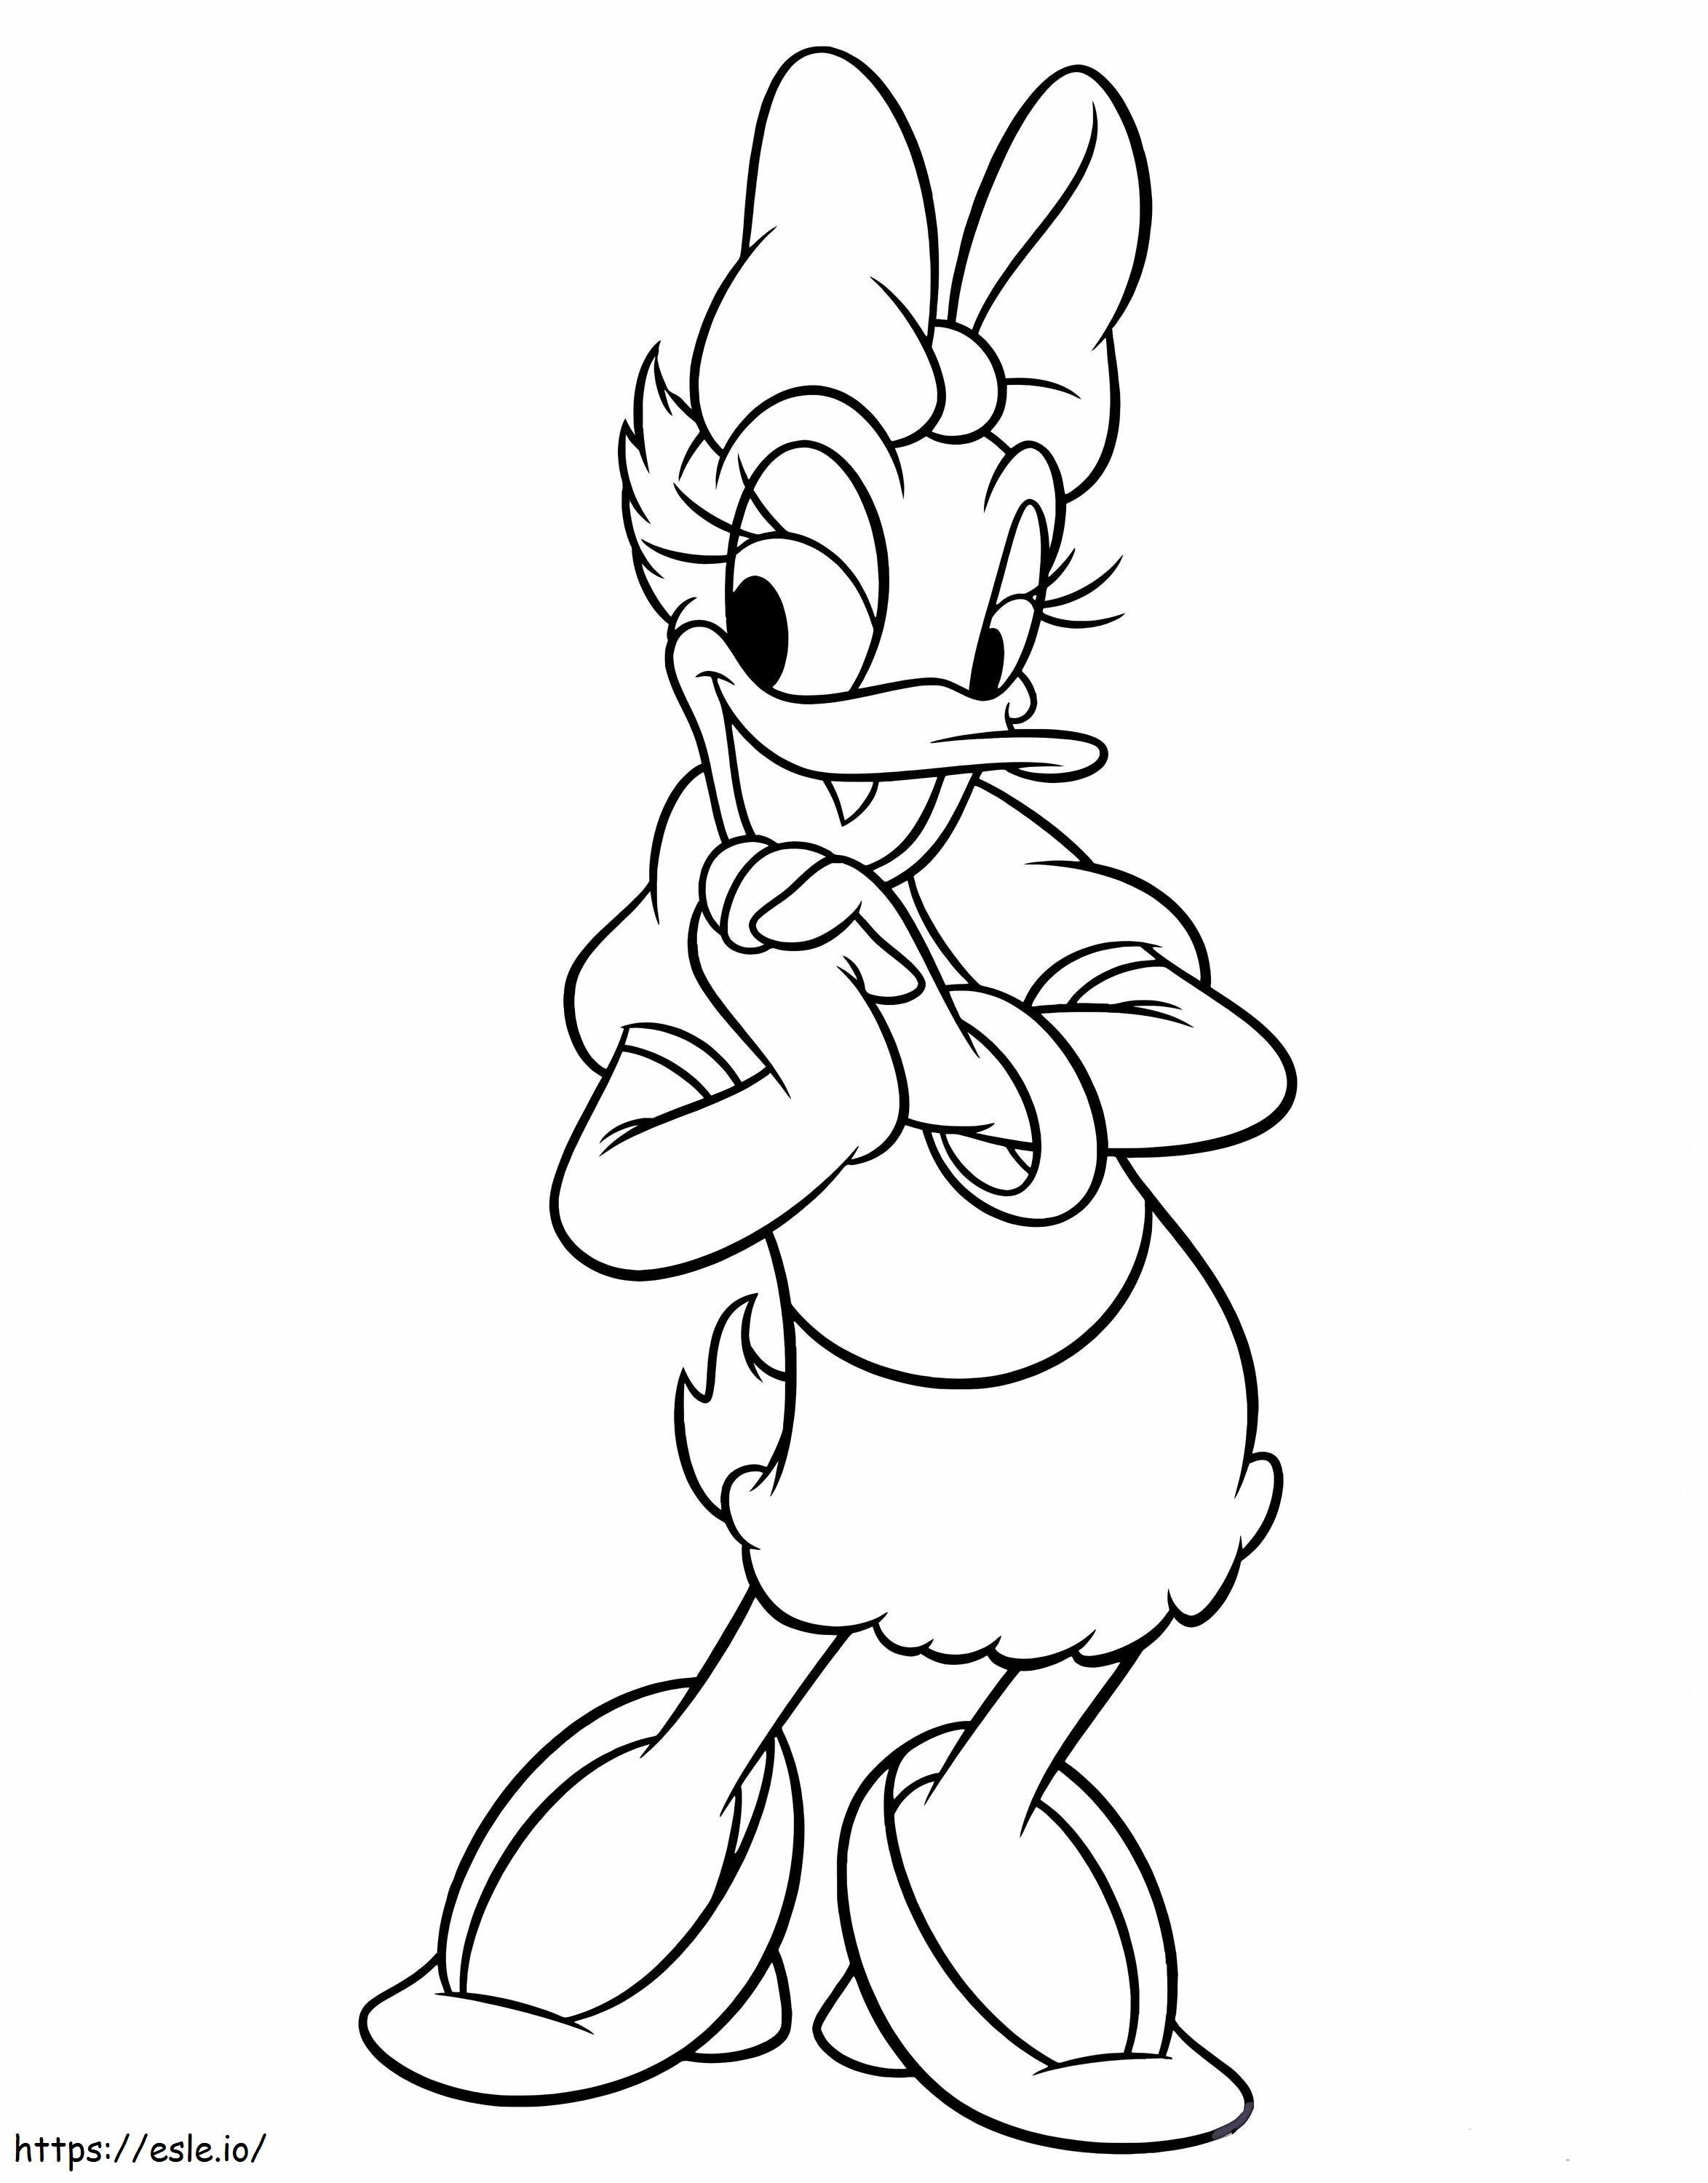 Basic Daisy Duck coloring page